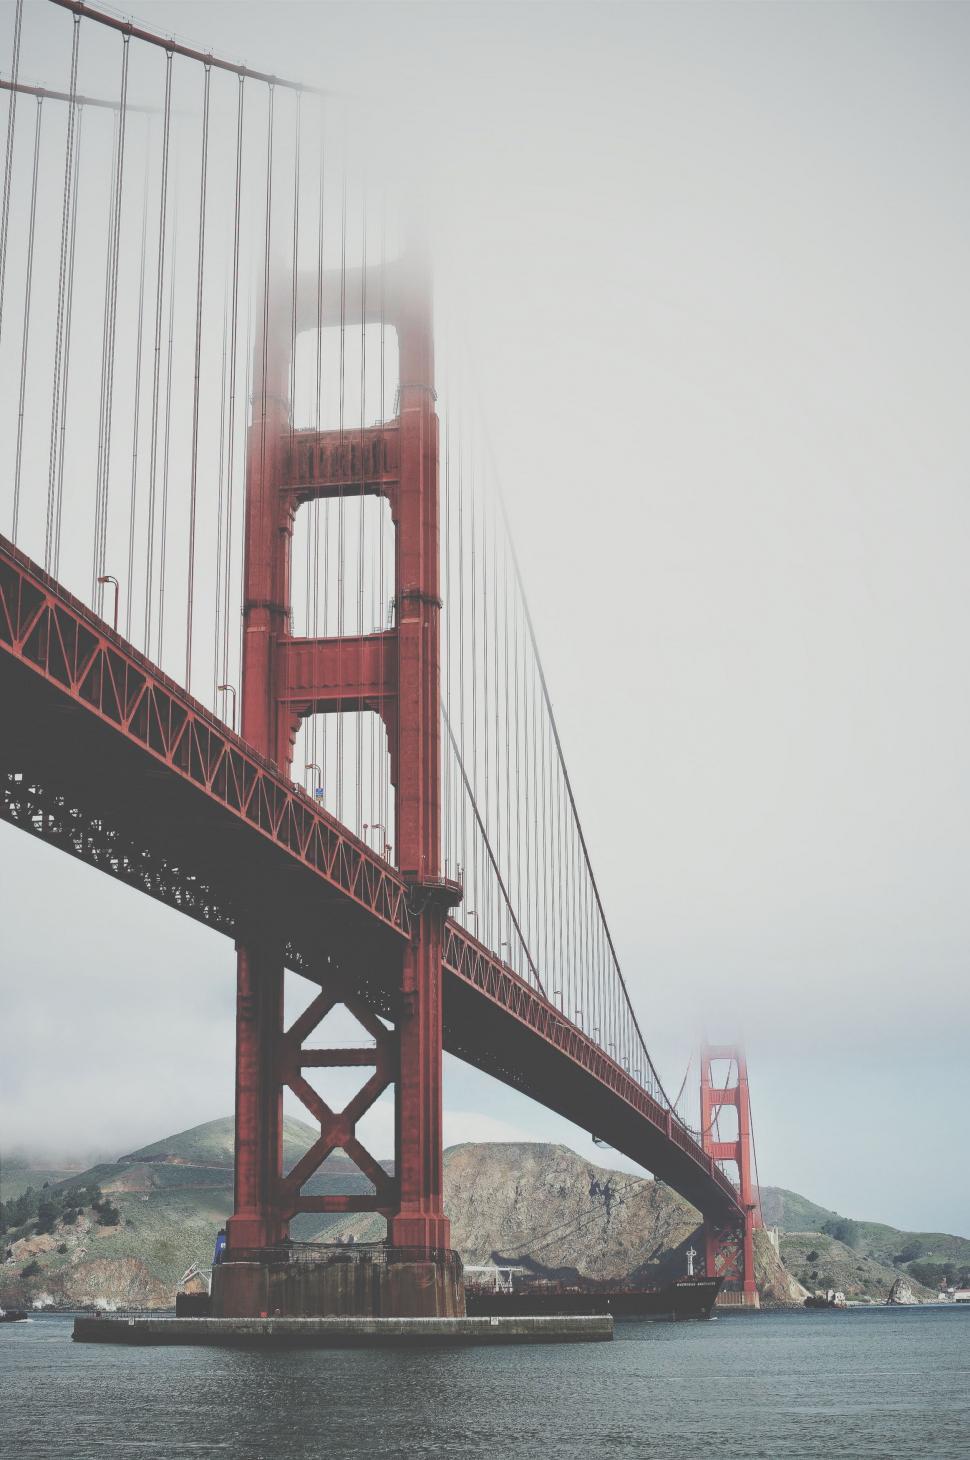 Free Image of The Iconic Golden Gate Bridge in San Francisco 